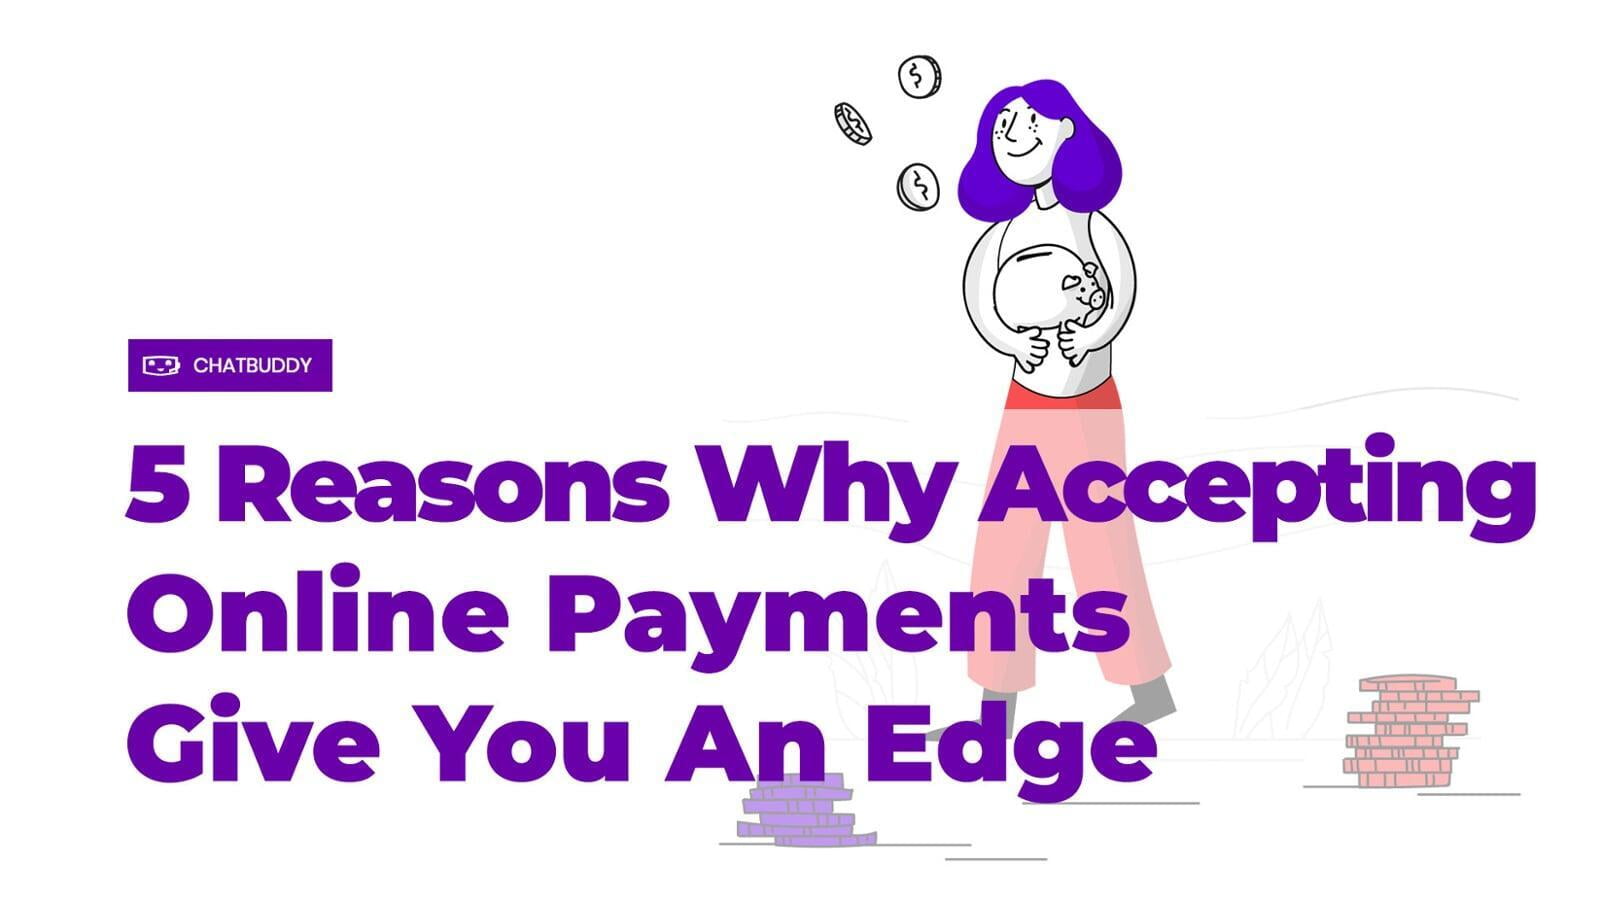 5 Reasons Why Accepting Online Payments Give You An Edge